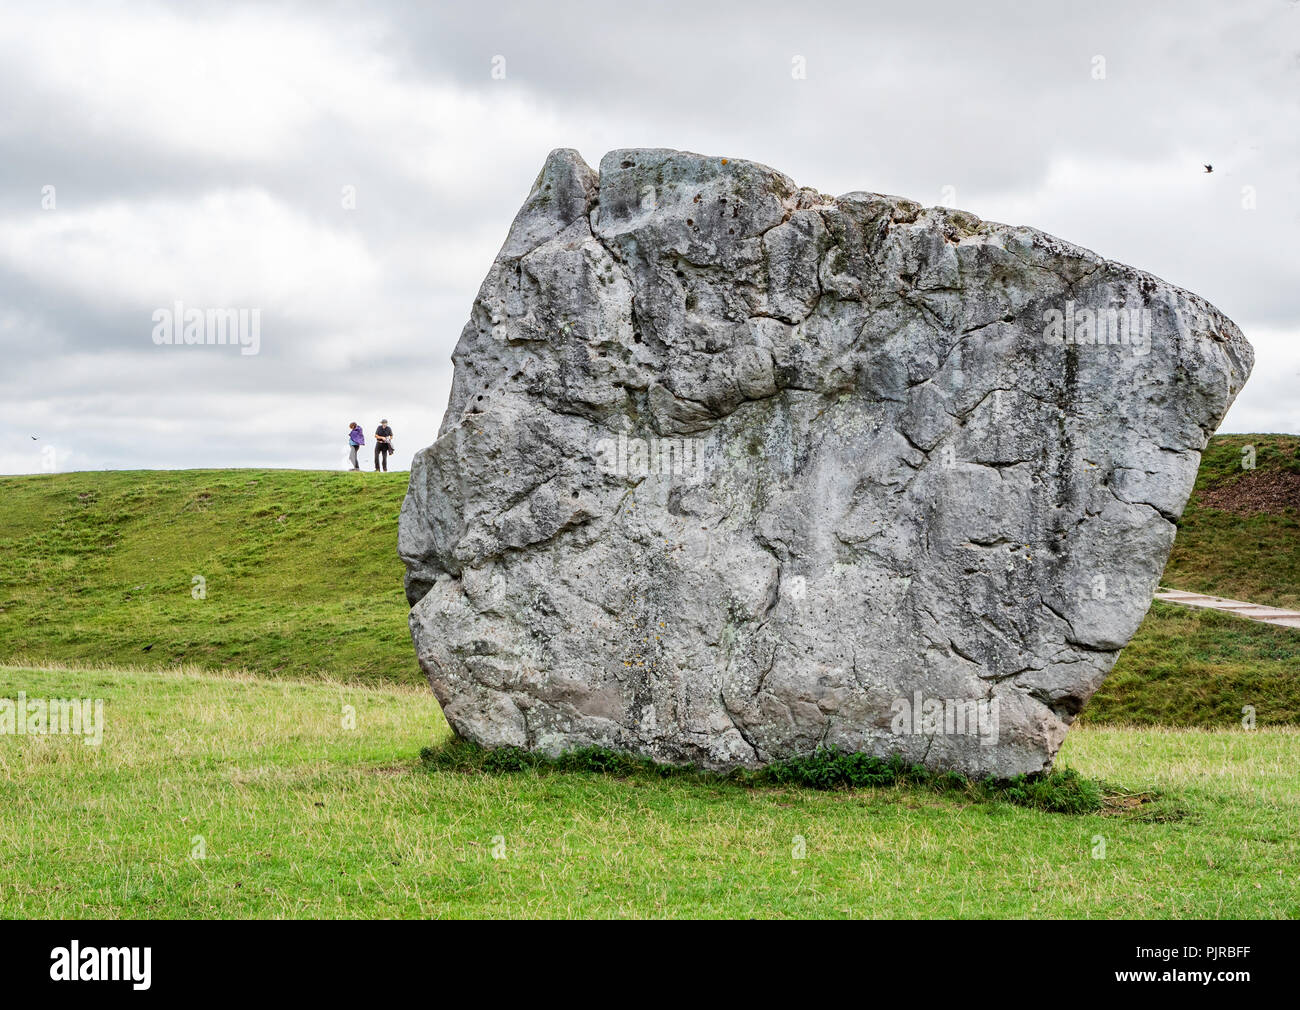 Gigantic sarsen stones at Avebury neolithic henge in Wiltshire UK which contains a village pub and three stone circles within its circumference Stock Photo